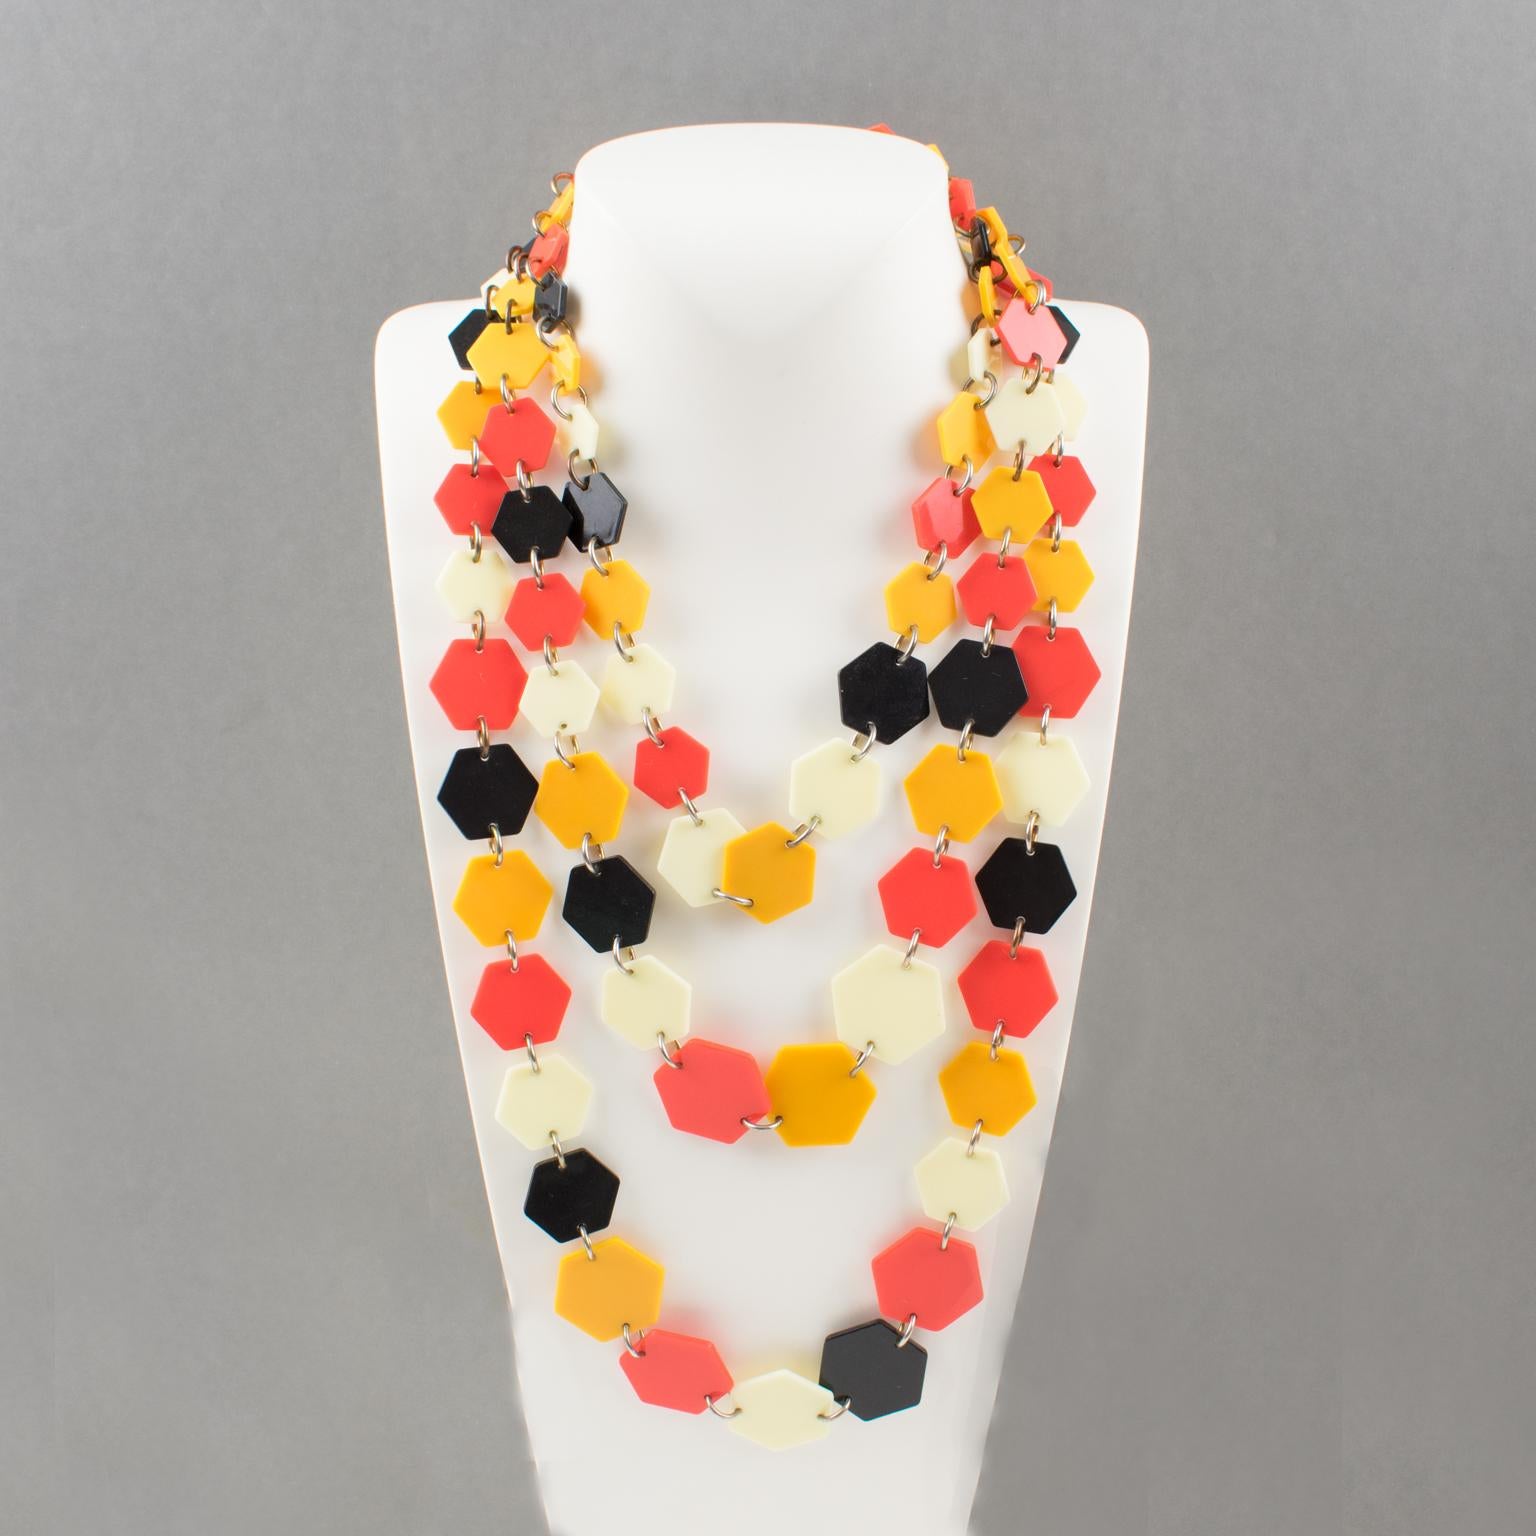 This sophisticated French artisan designer 1970s multi-strand necklace features three graduated rows of lucite geometric elements in a flat hexagonal shape. The piece boasts the typical colors of the hippie period: black, neon orange, yellow